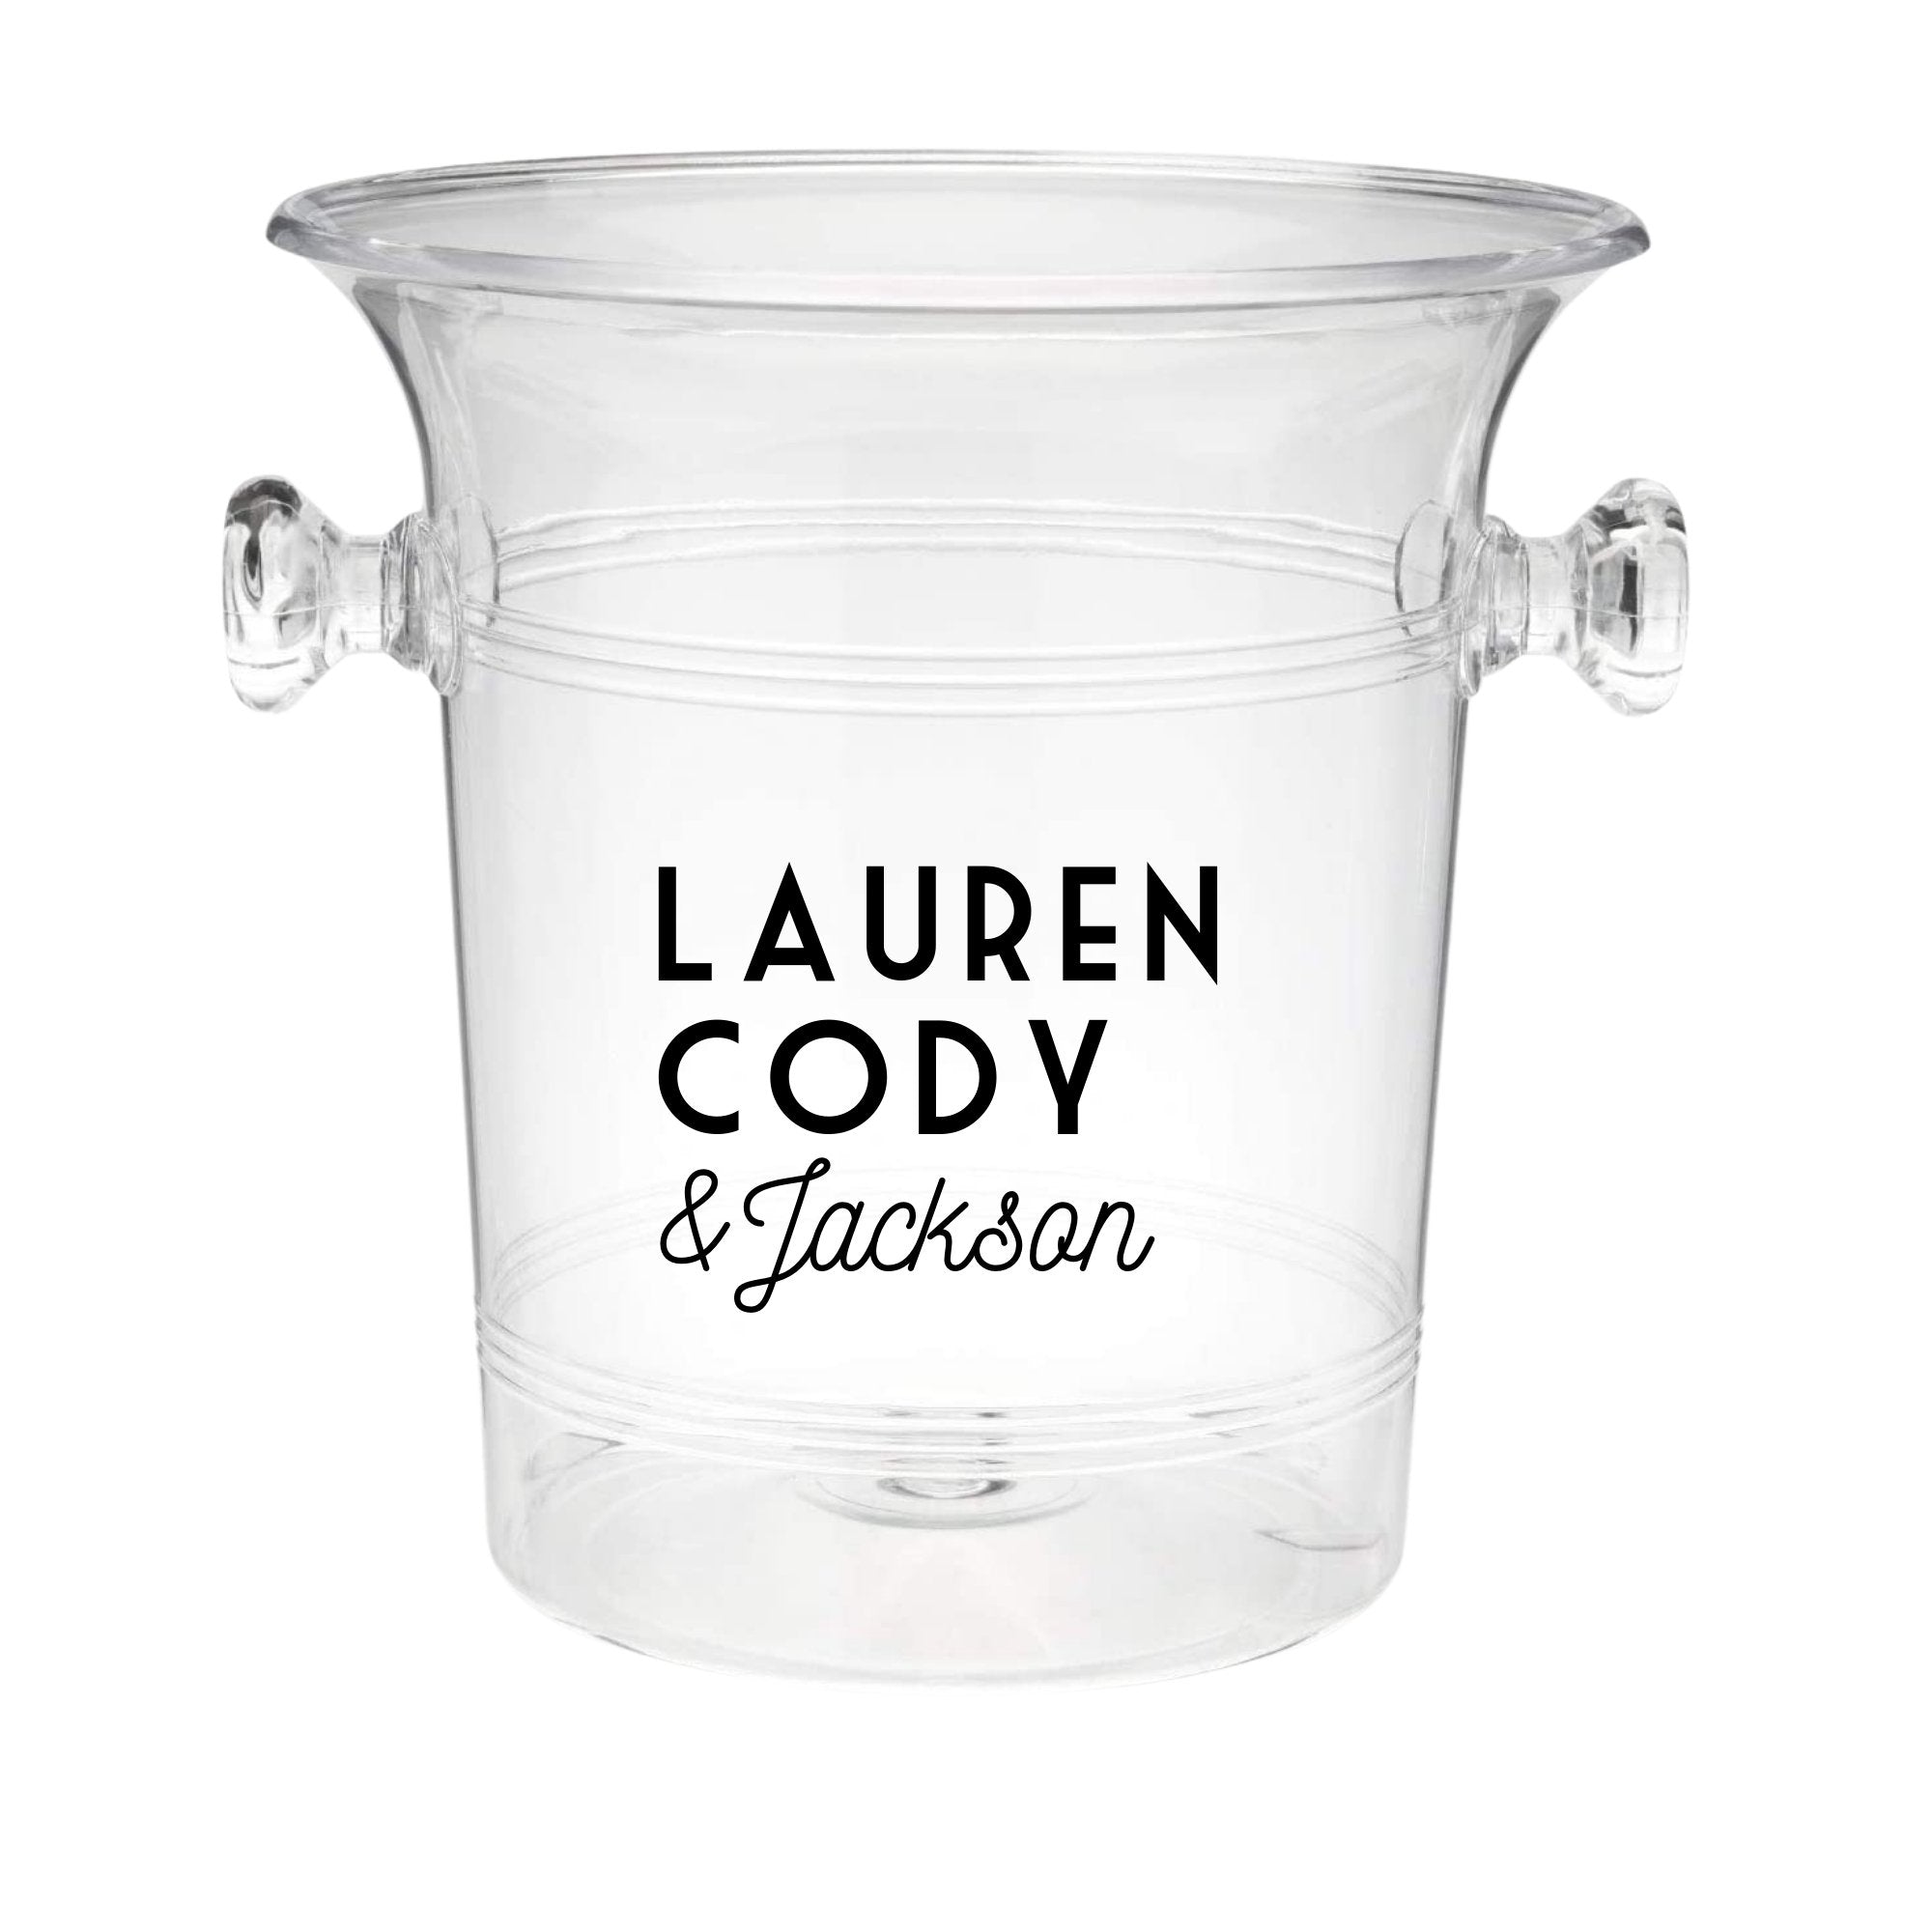 An ice bucket is customized with a 3 name design in pink